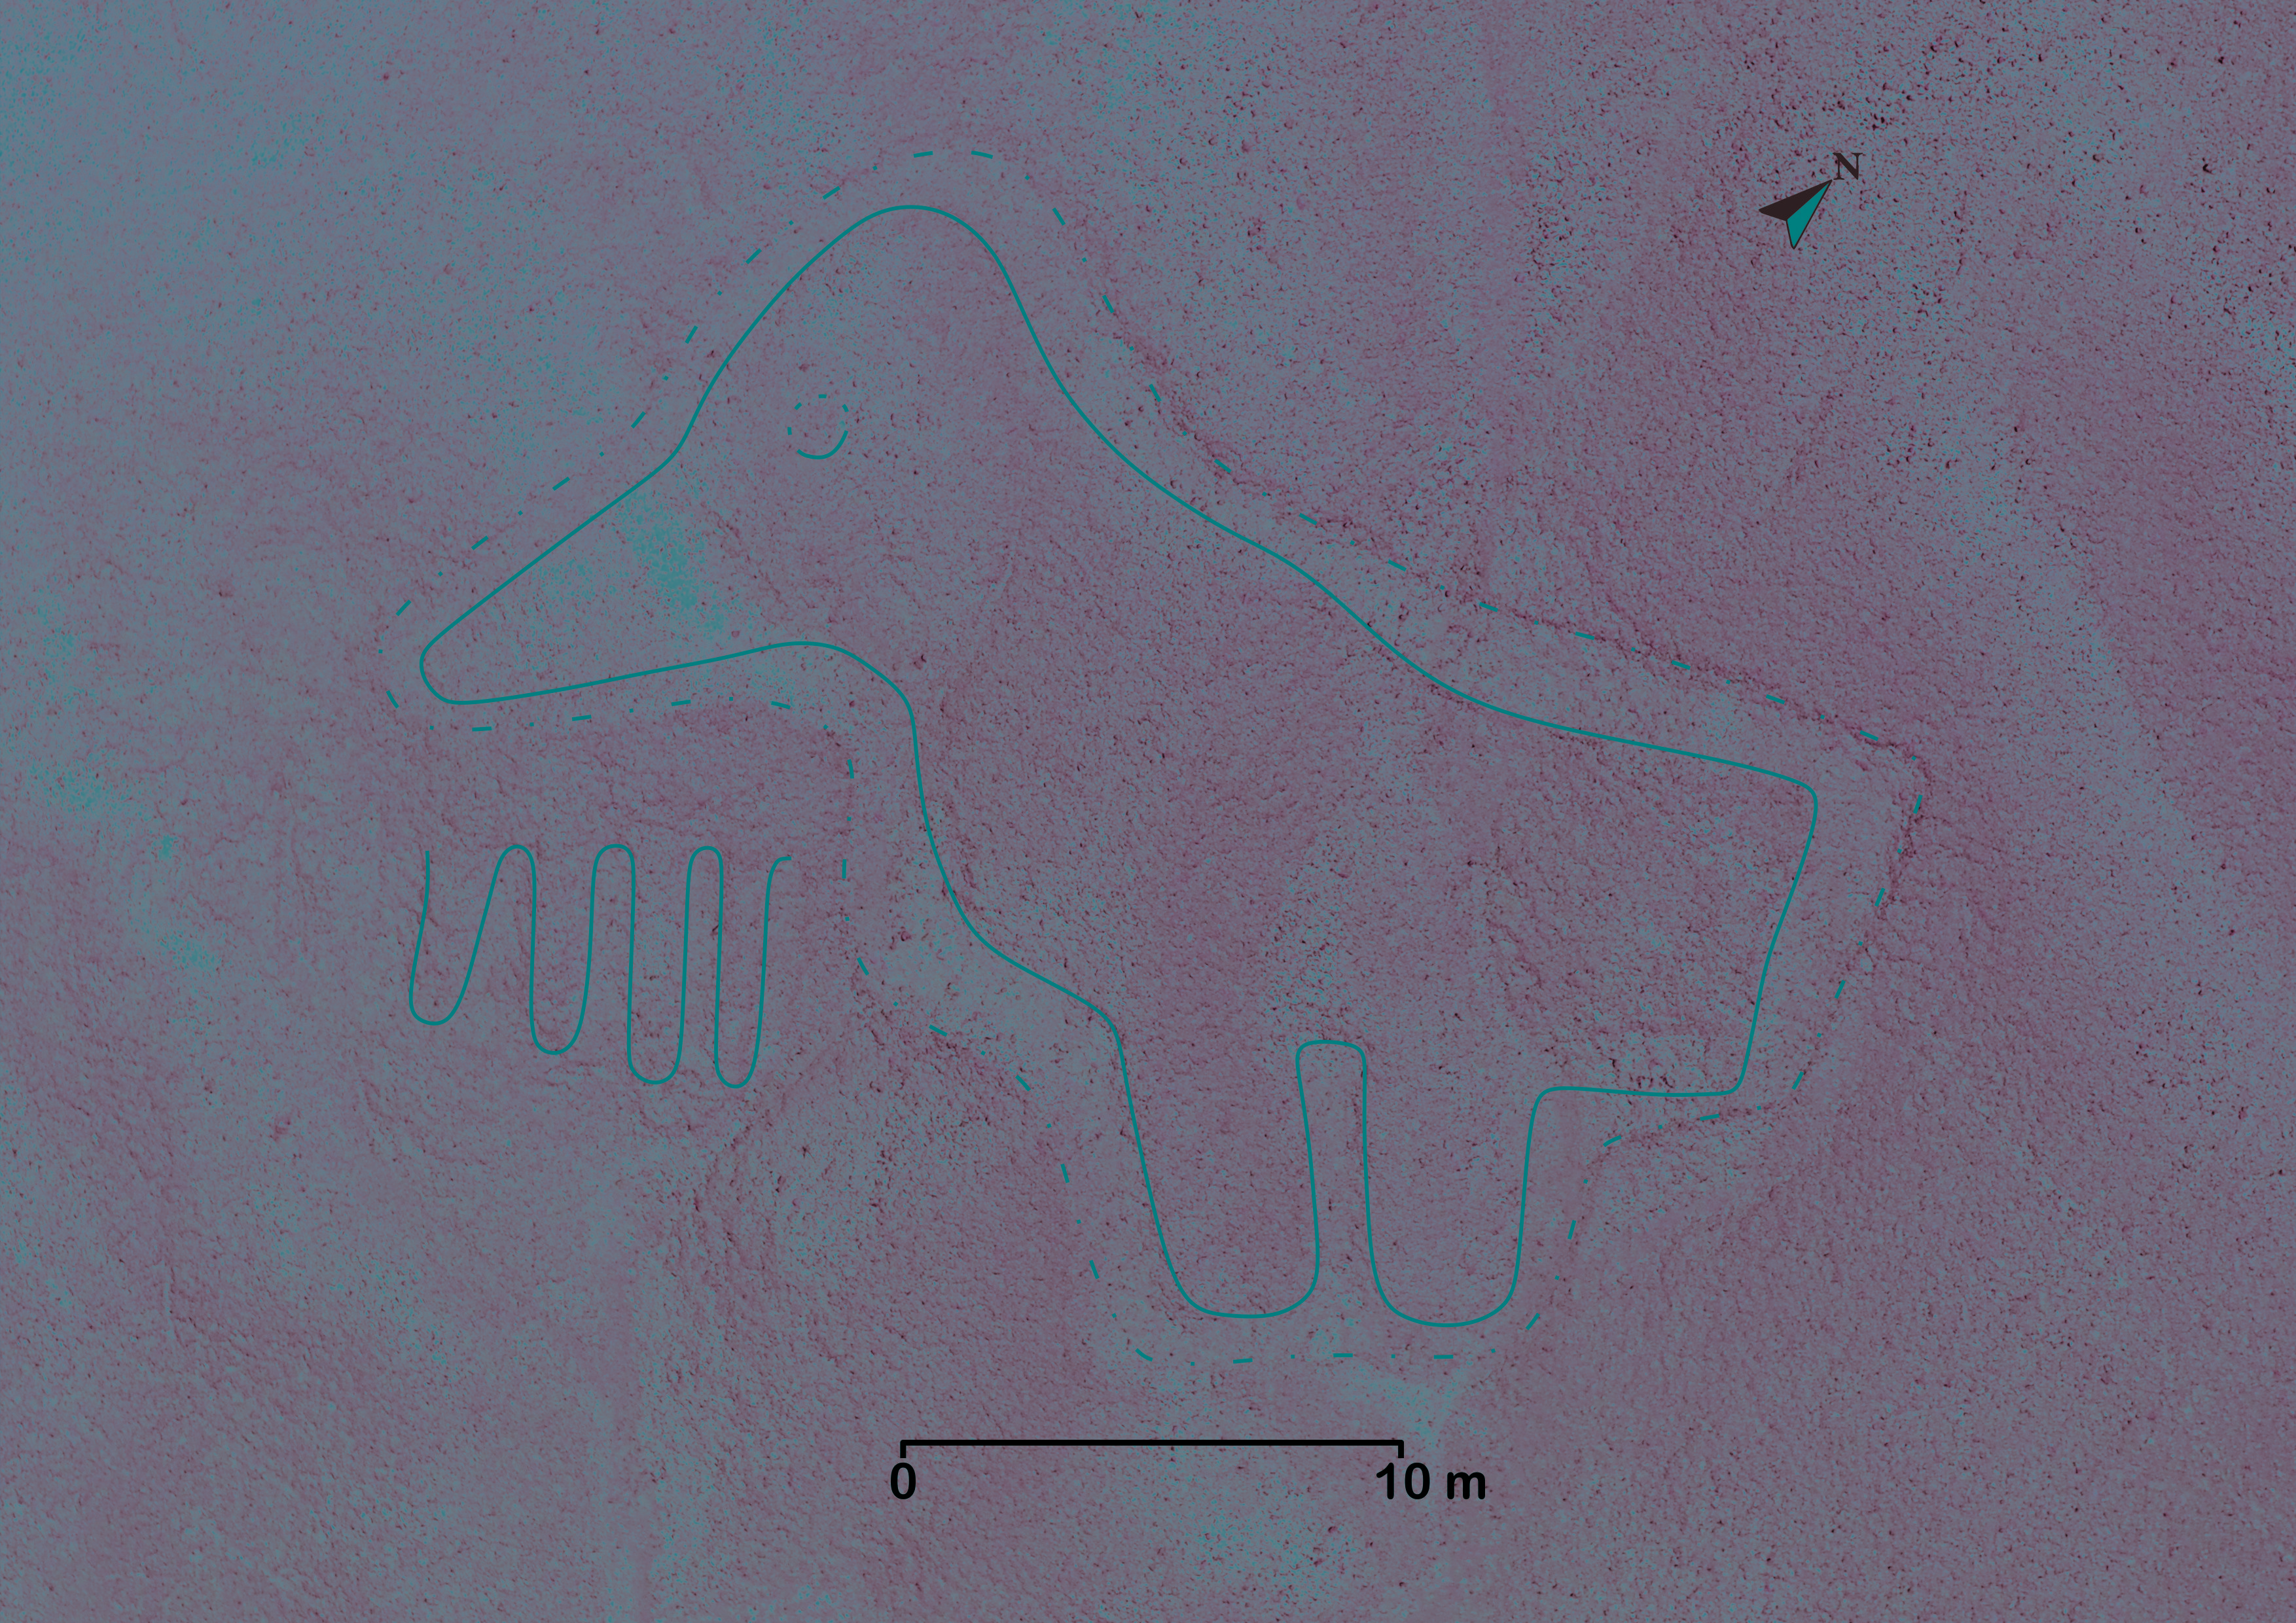 Researchers discover over 100 new ancient designs in Peru's Nazca lines